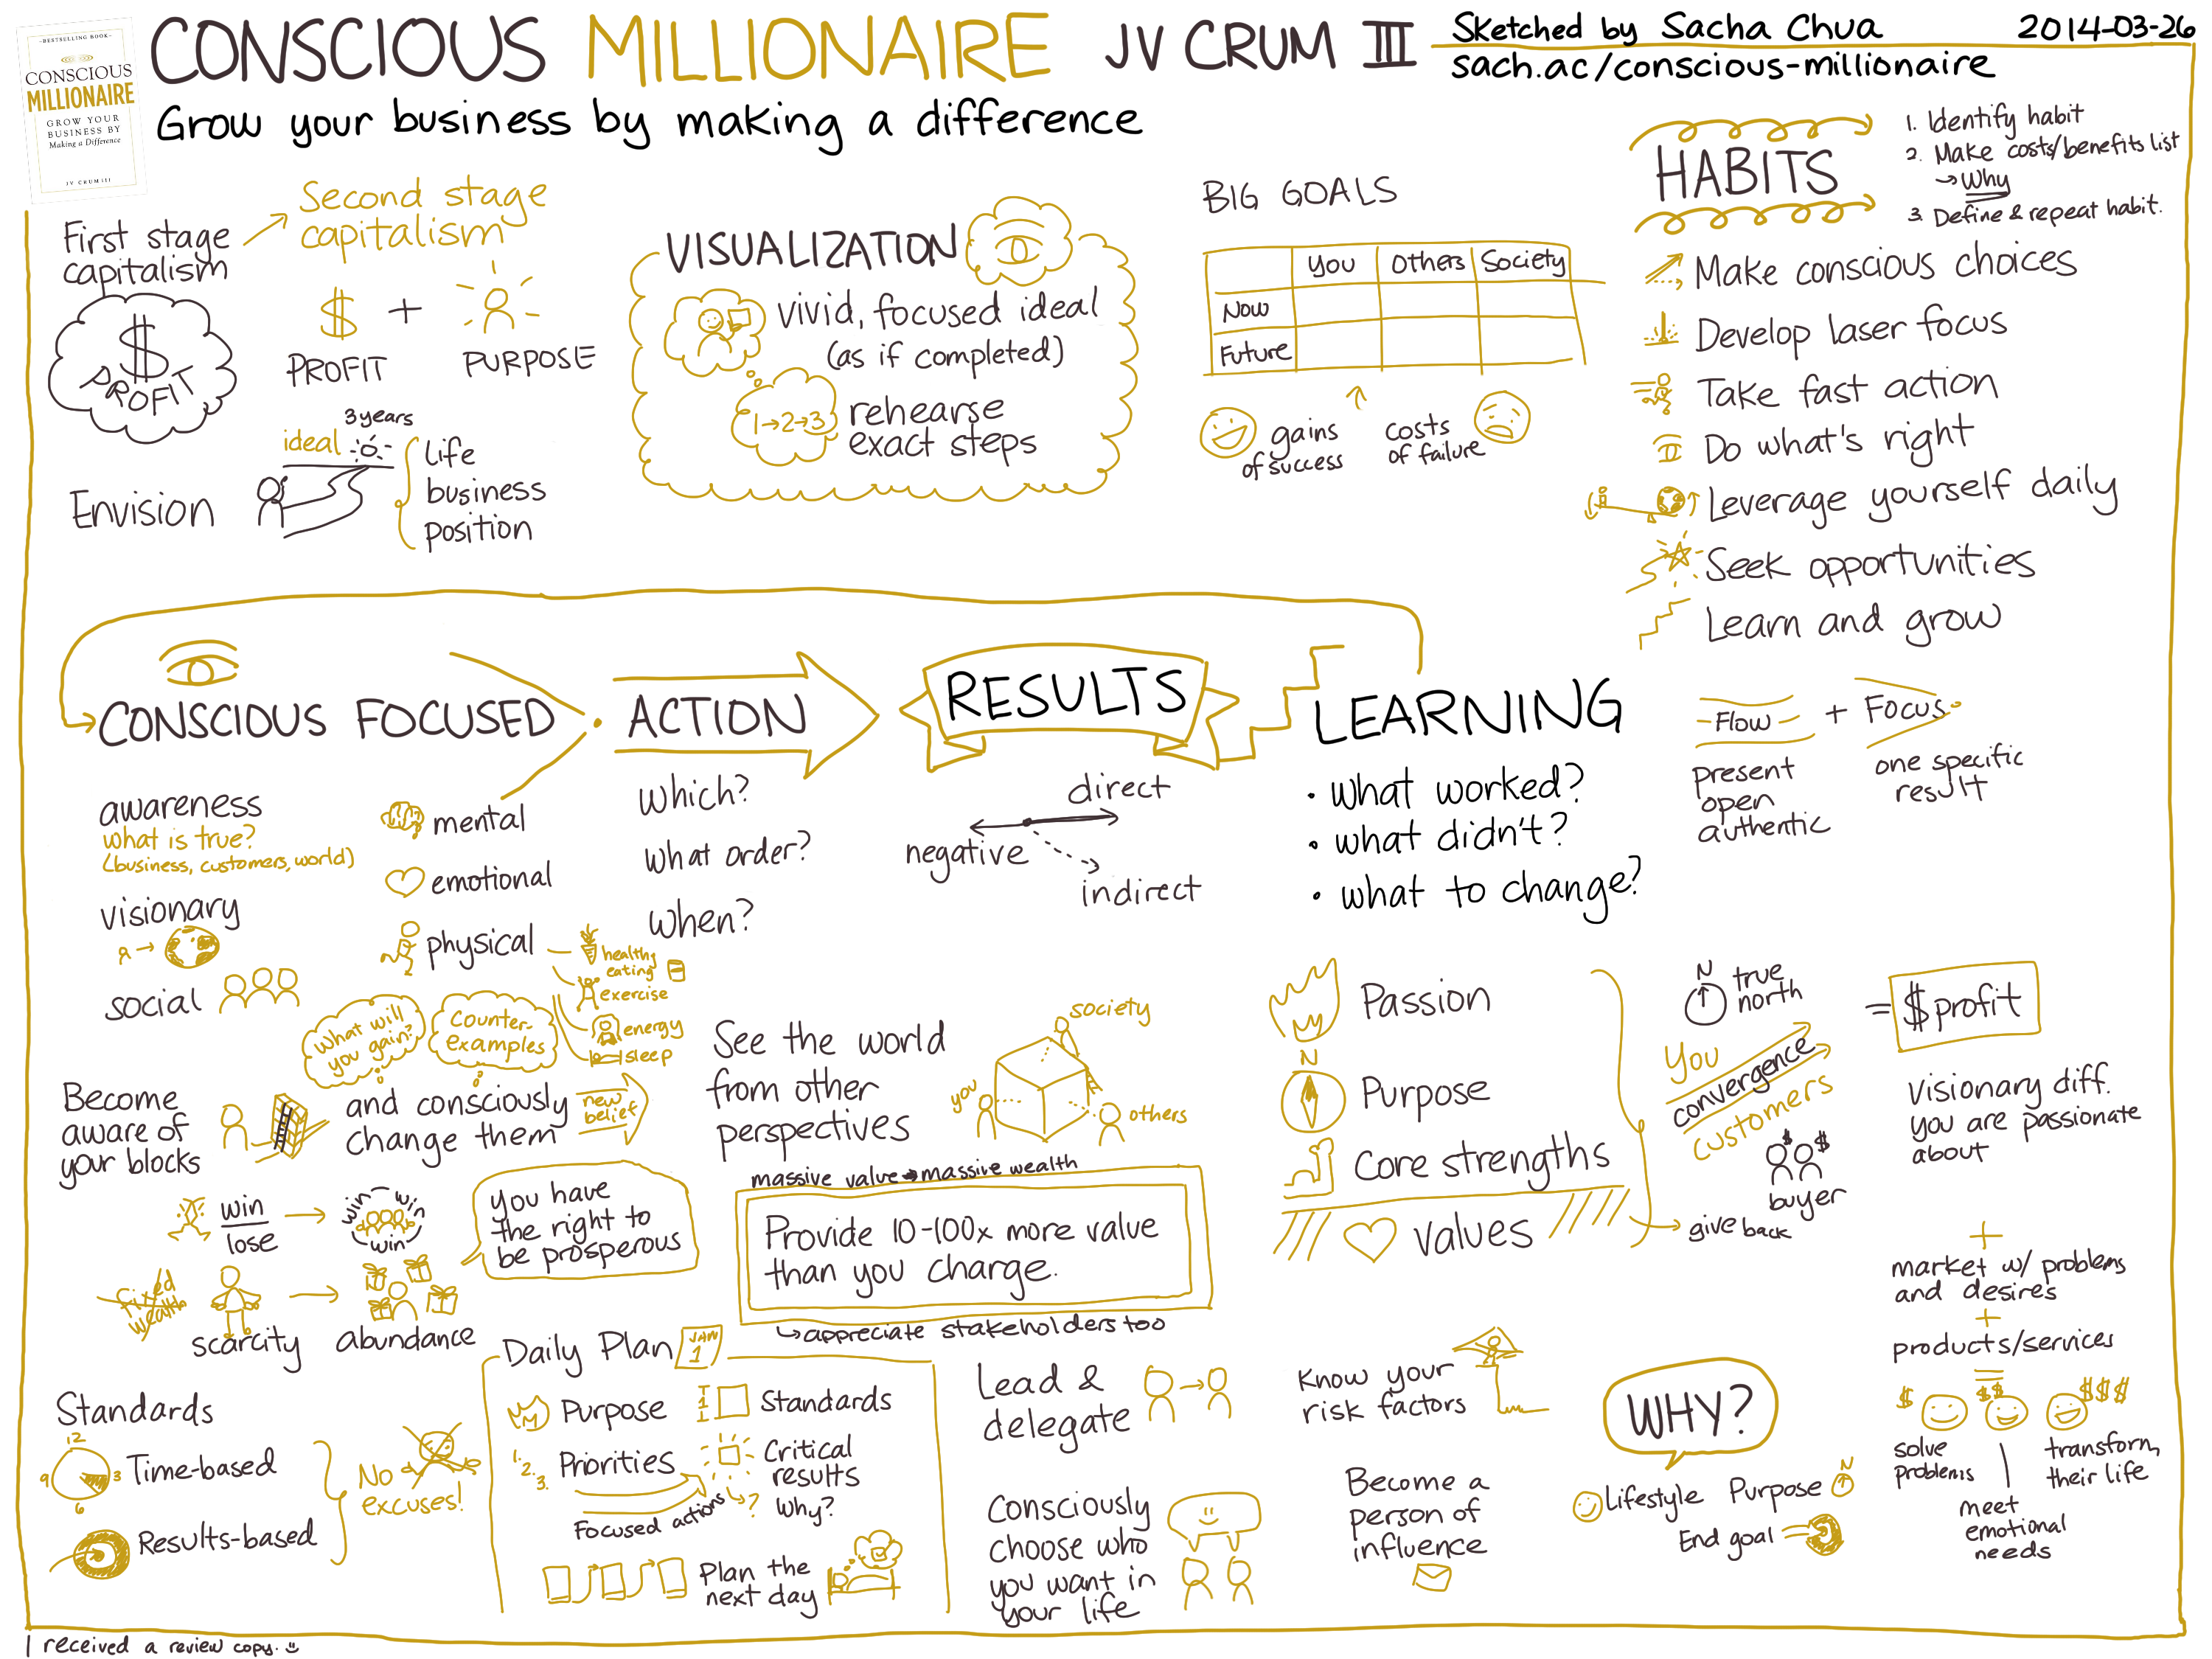 2014-03-26 Sketched Book - Conscious Millionaire - JV Crum III.png